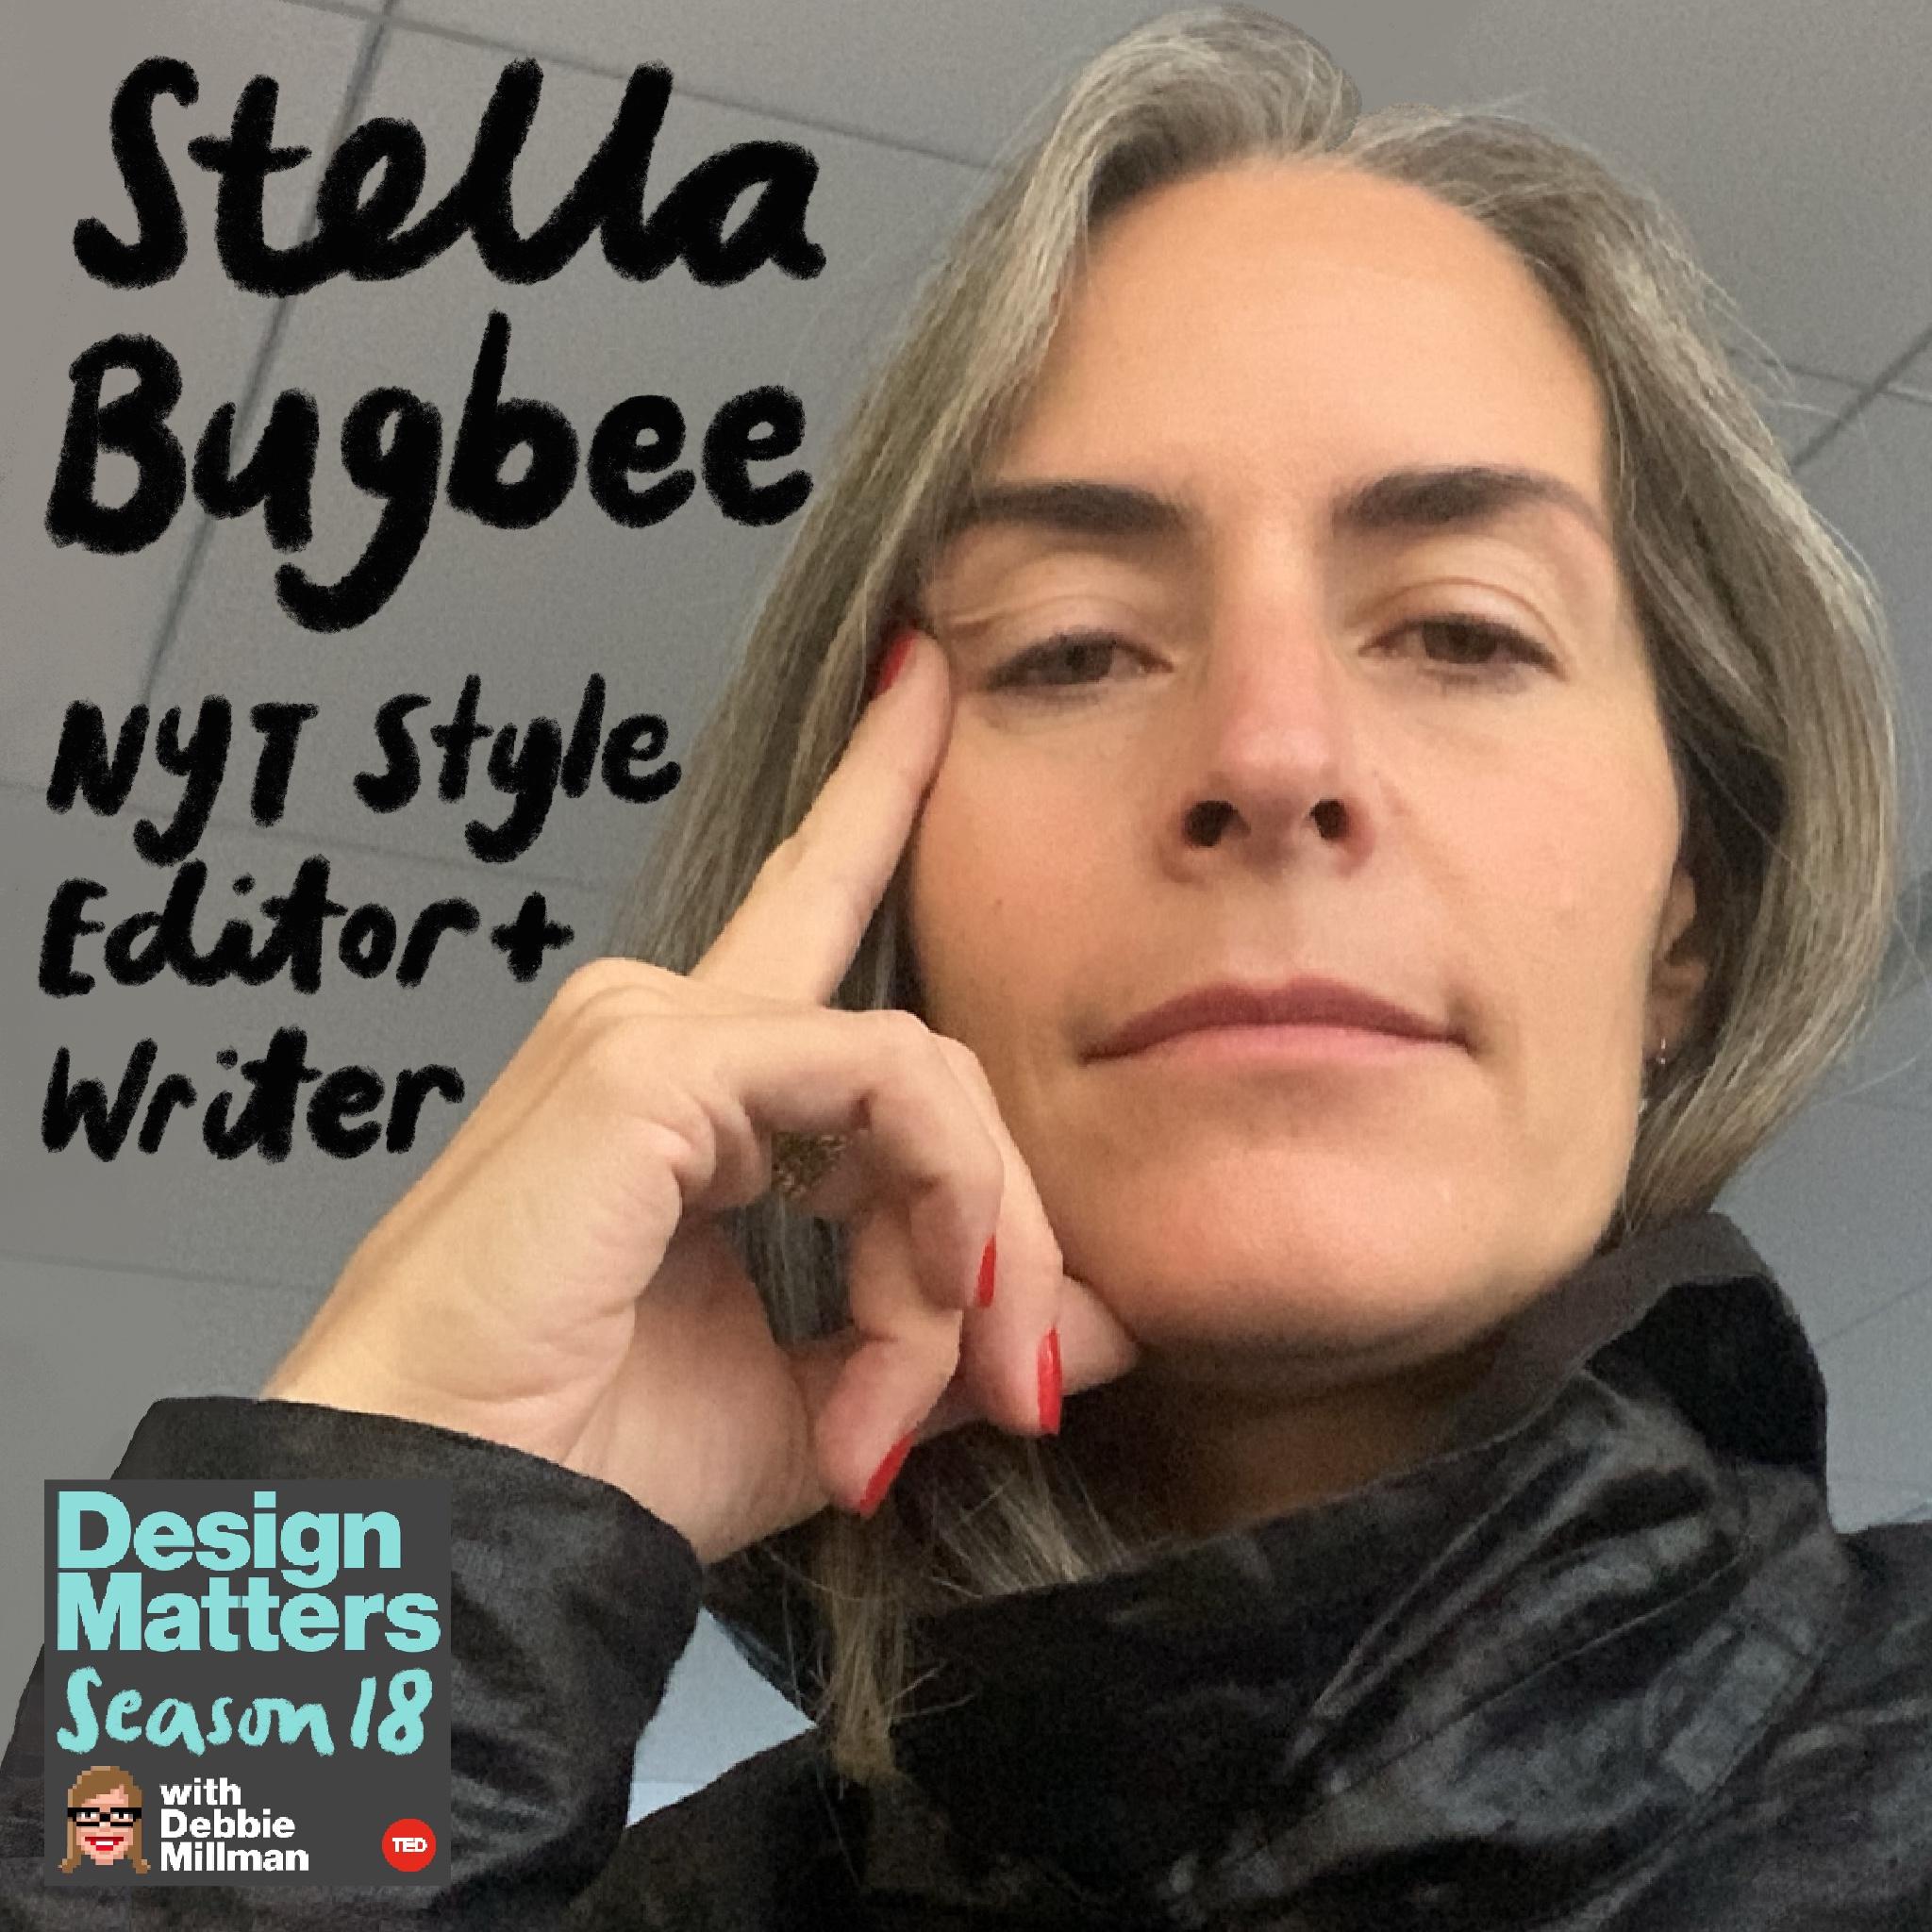 Thumbnail for "Stella Bugbee".